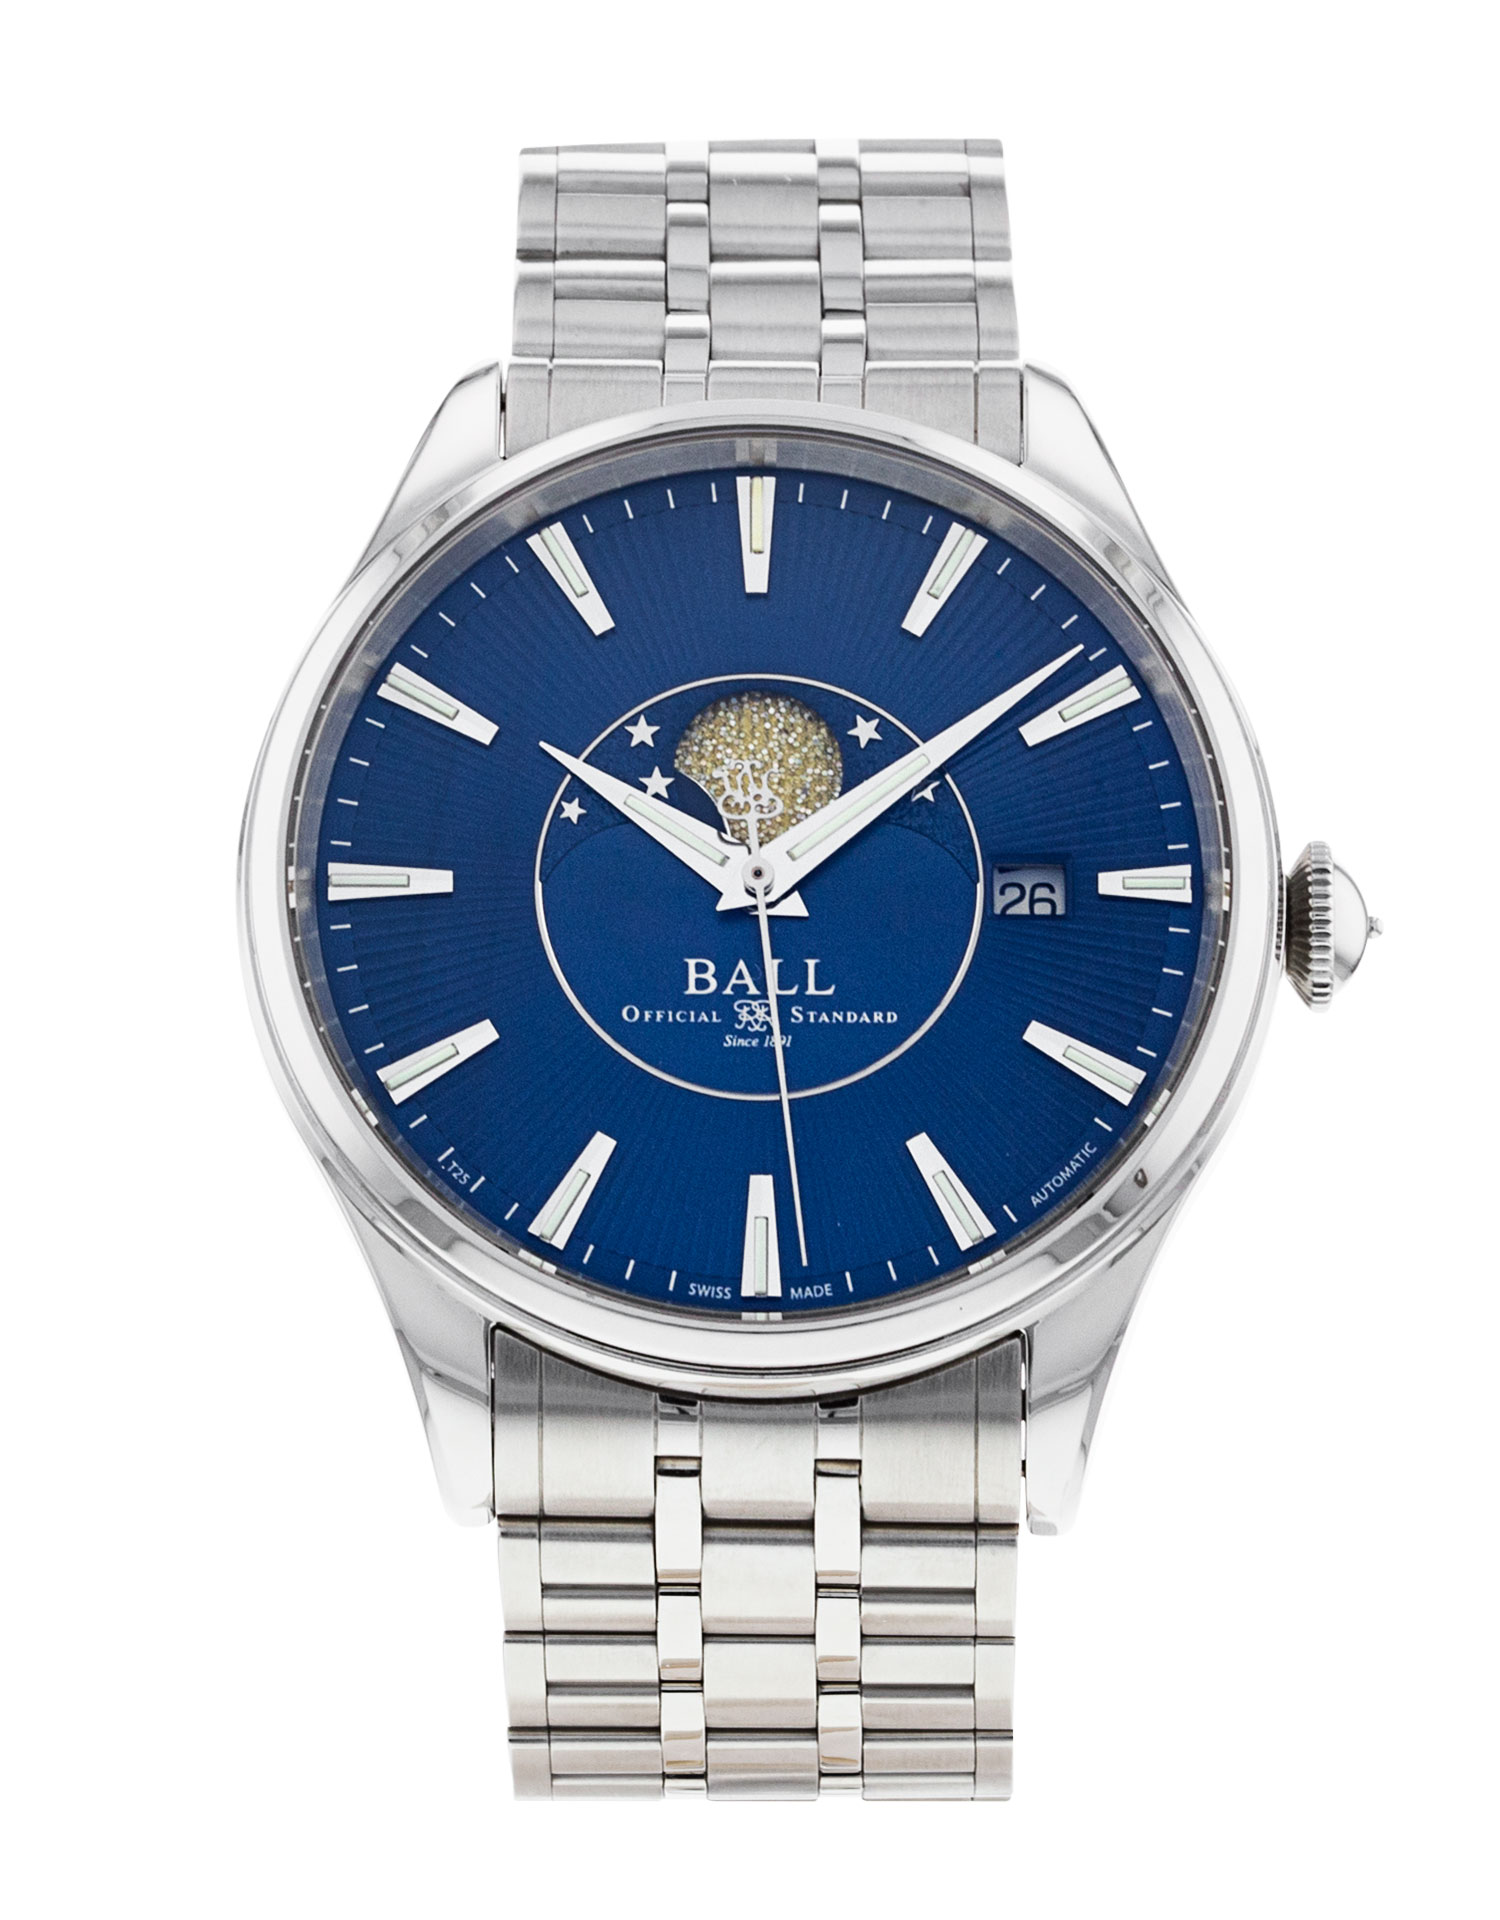 Ball Moon Phase (NM3082D-SJ-BE) Market Price | WatchCharts